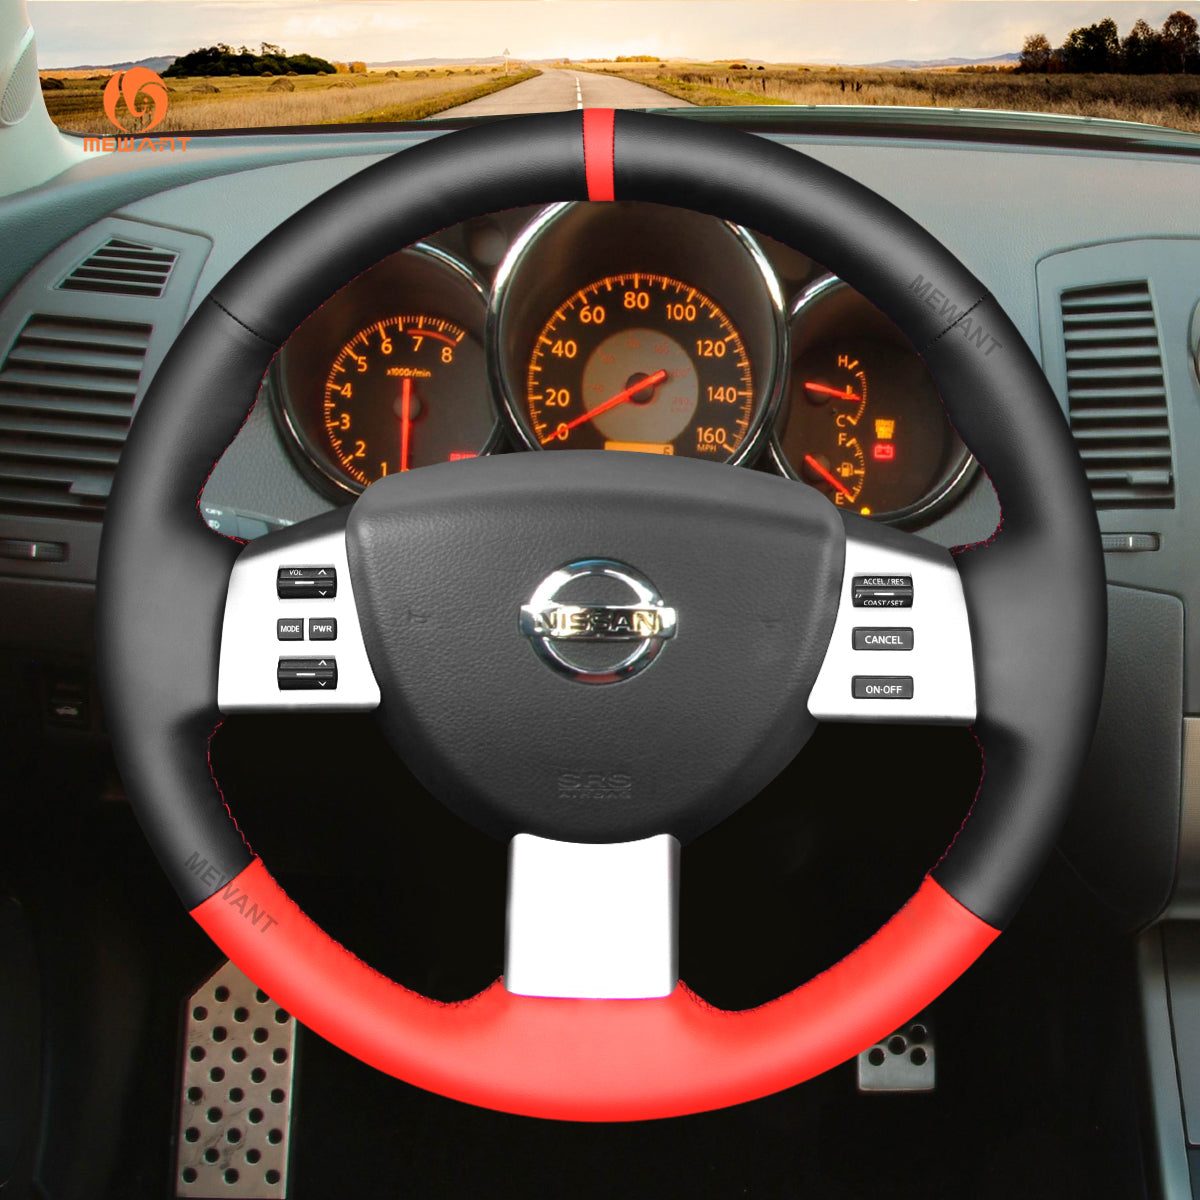 MEWANT DIY Black Leather Suede Car Steering Wheel Cover for Nissan Altima Maxima Murano Quest